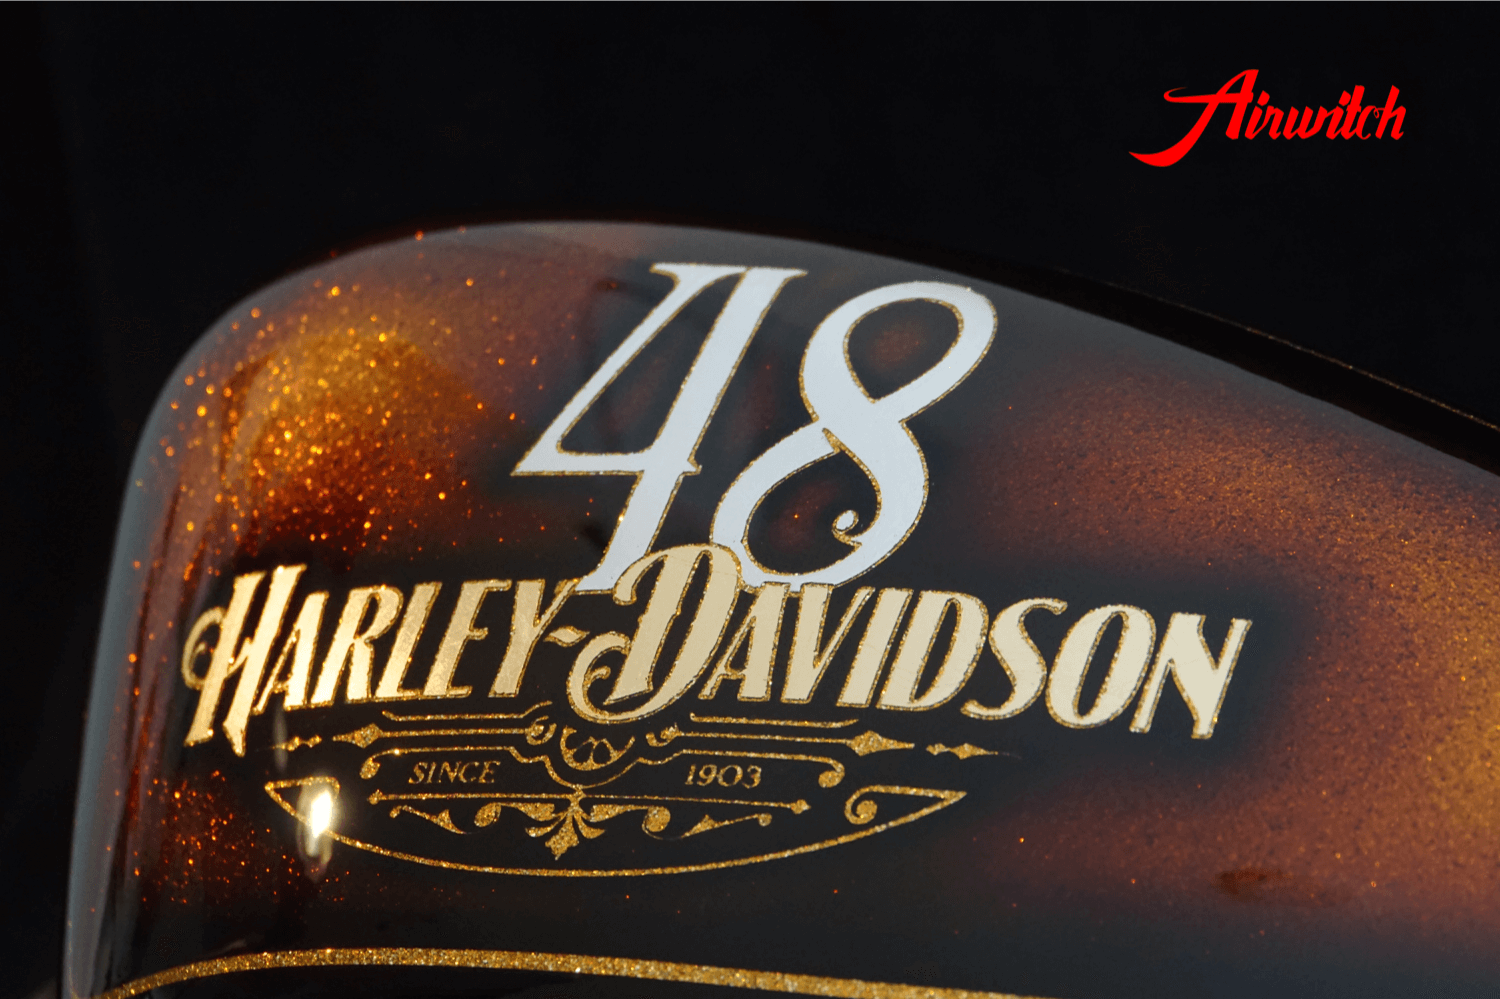 Custom Paint Harley Davidson Sportster Forty Eight Metalflake, Candy Airbrush, Gold & Silver leaf, Eagle